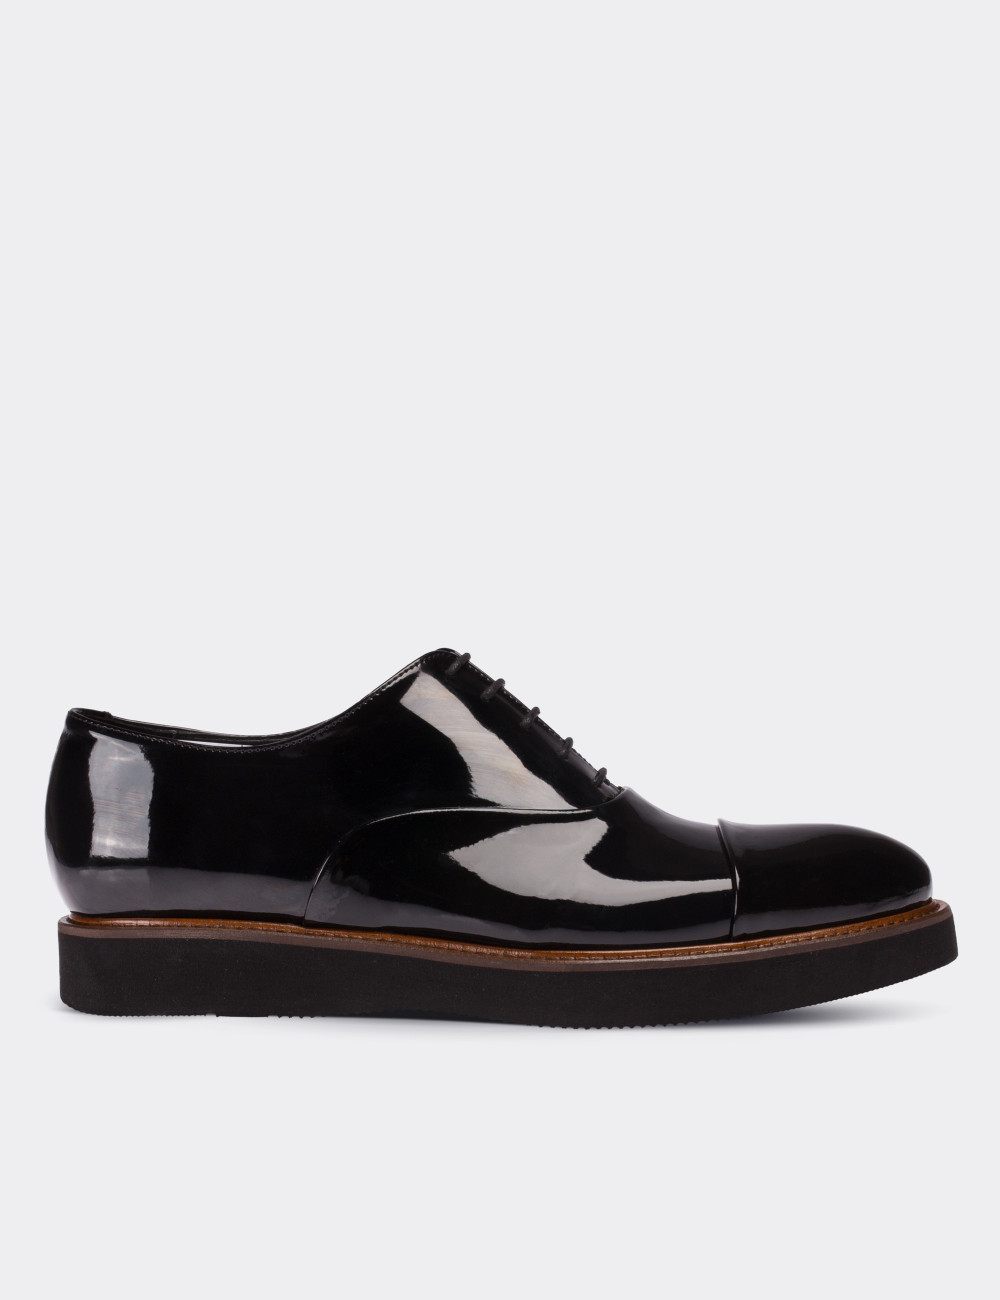 black patent leather lace up shoes